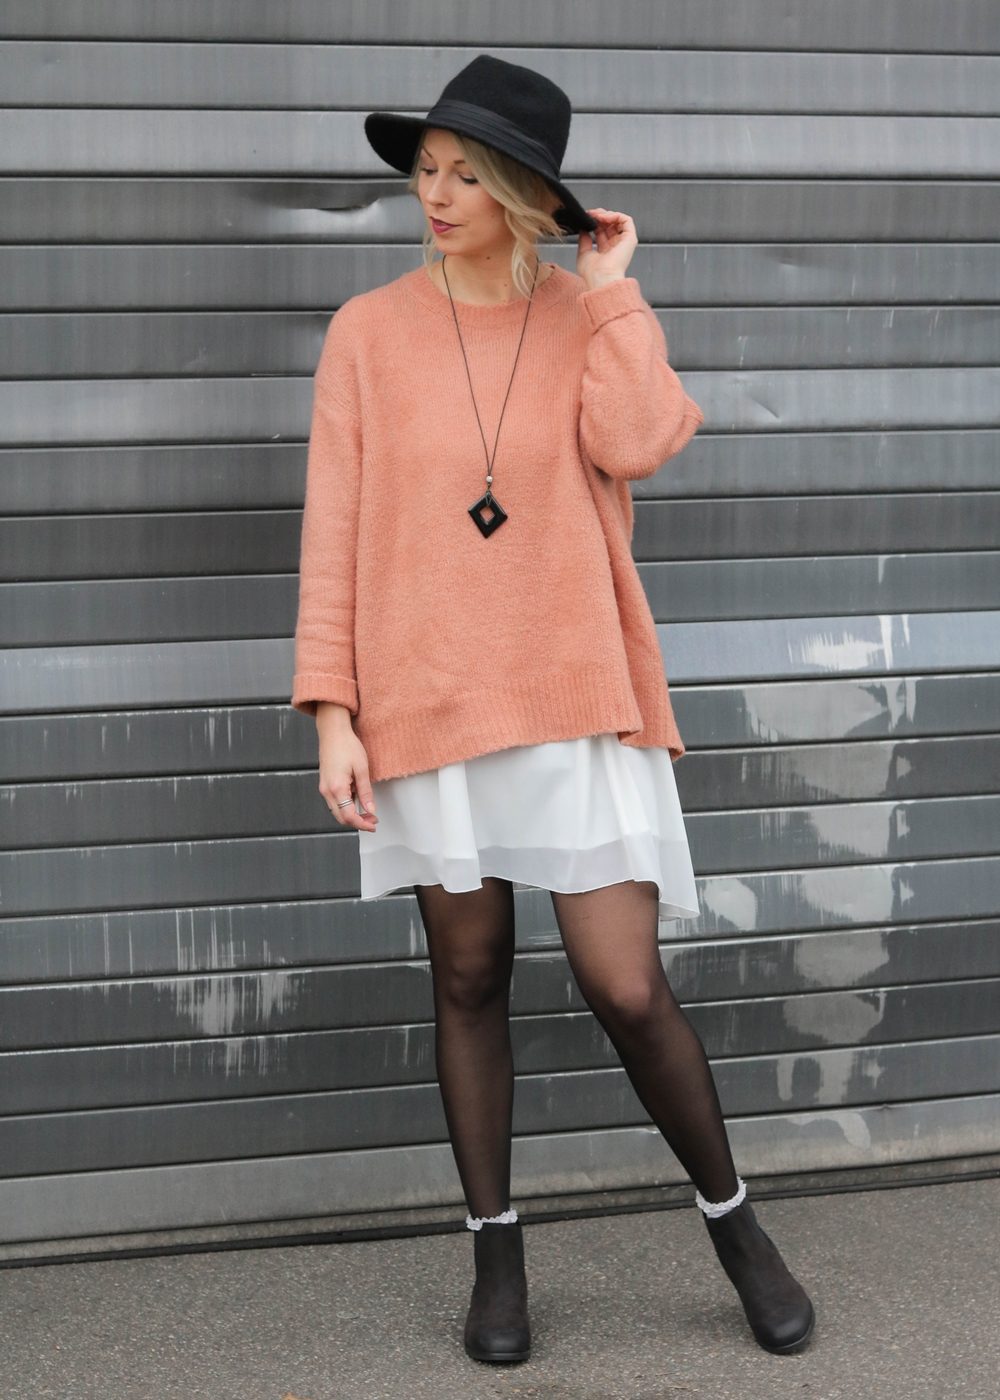 fashionblogger-outfit-ankle-boots-shoemates-rosa-strickpullover-zara-lagenlook-3